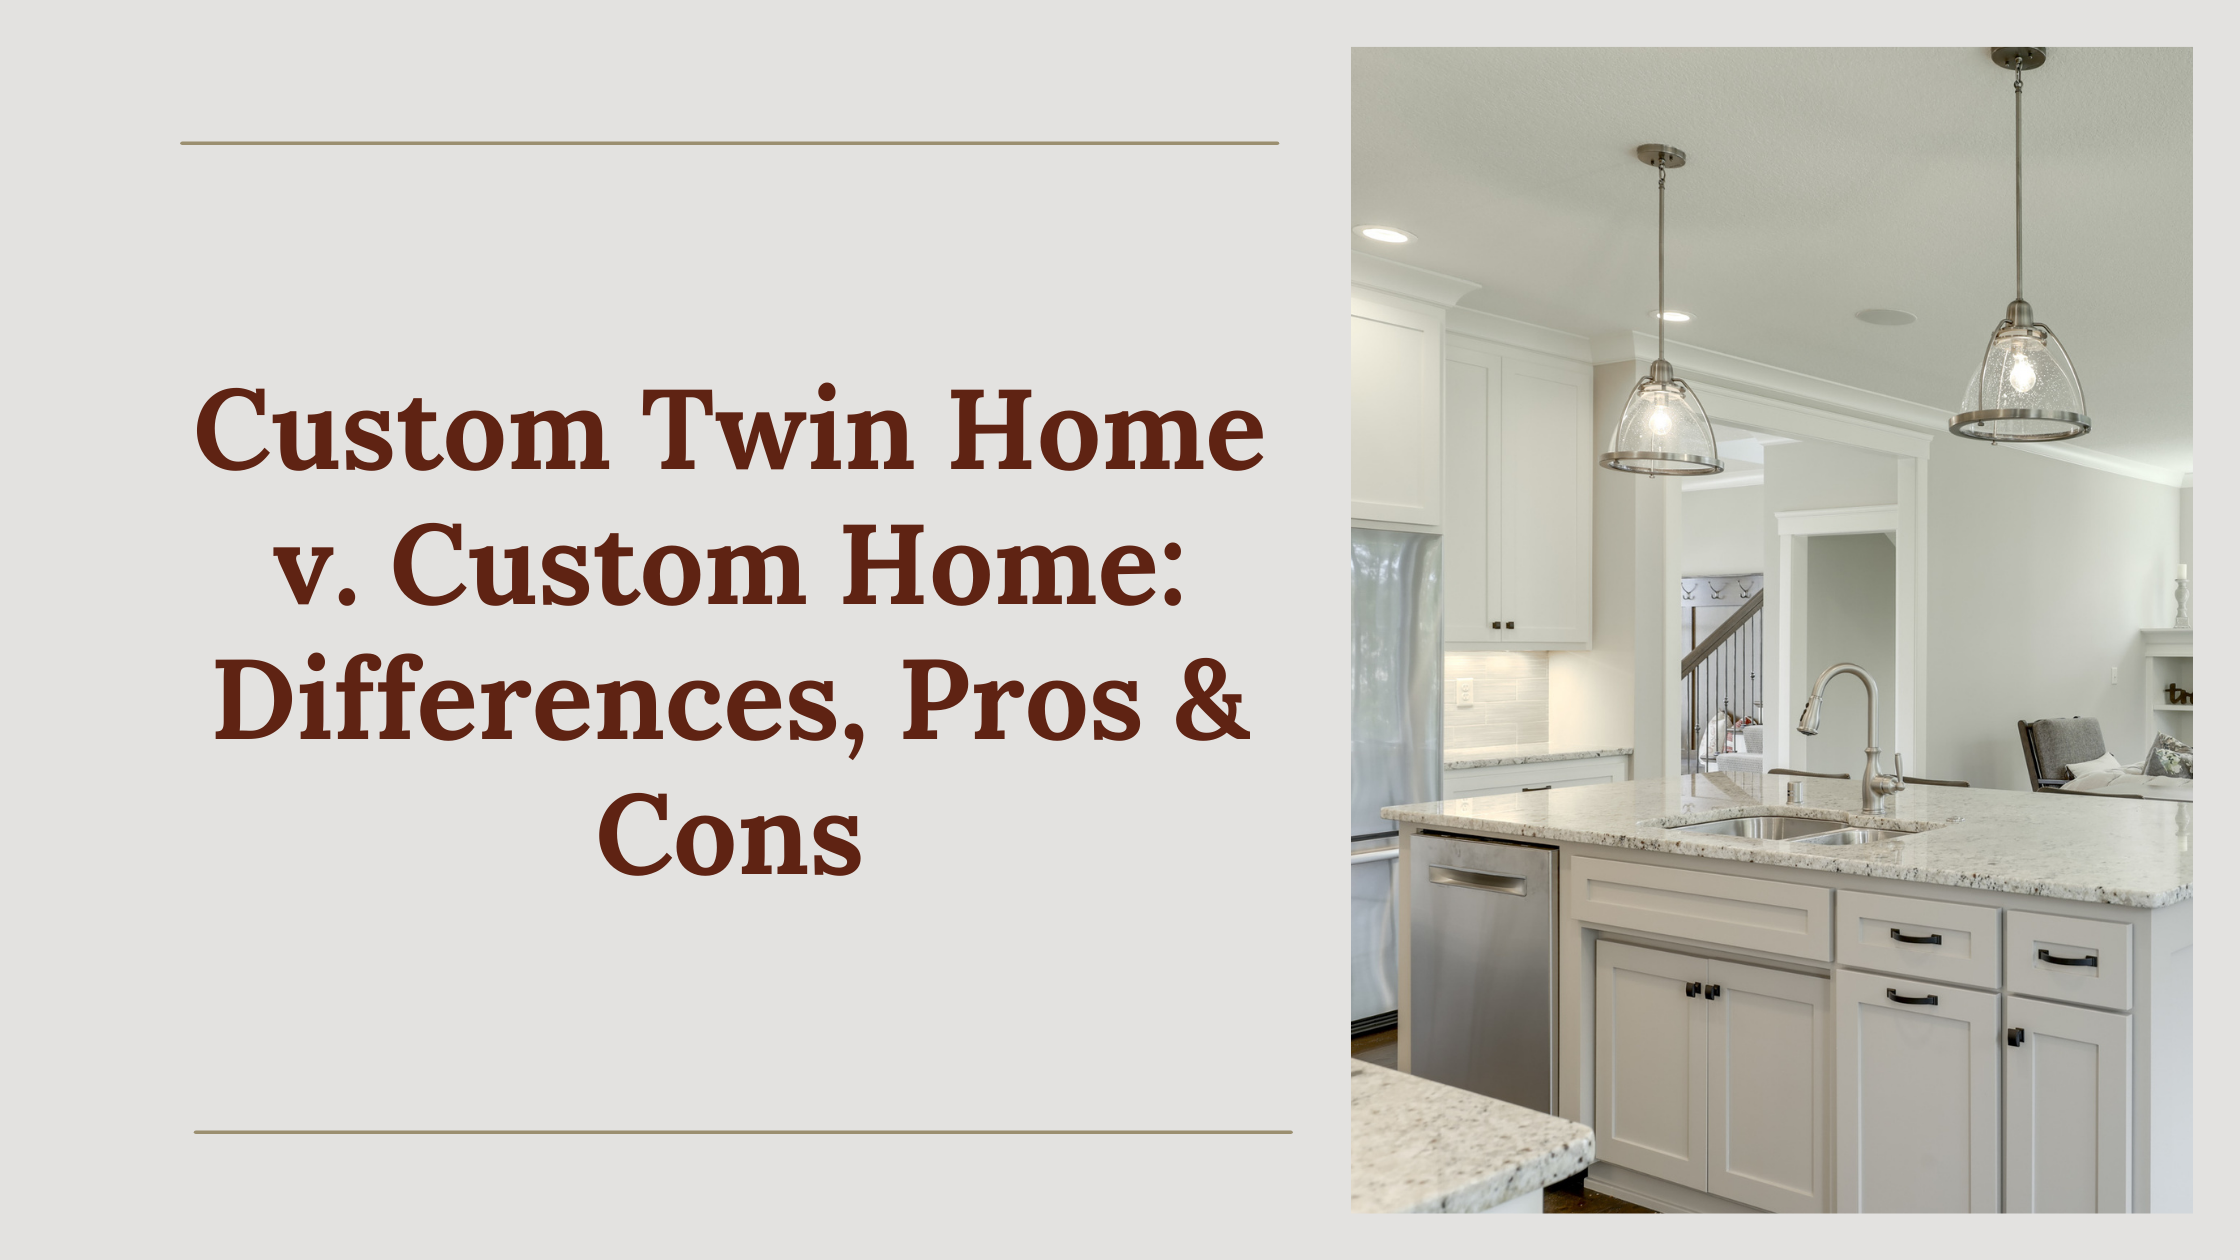 Custom Twin Home Versus Custom Home: Differences, Pros & Cons